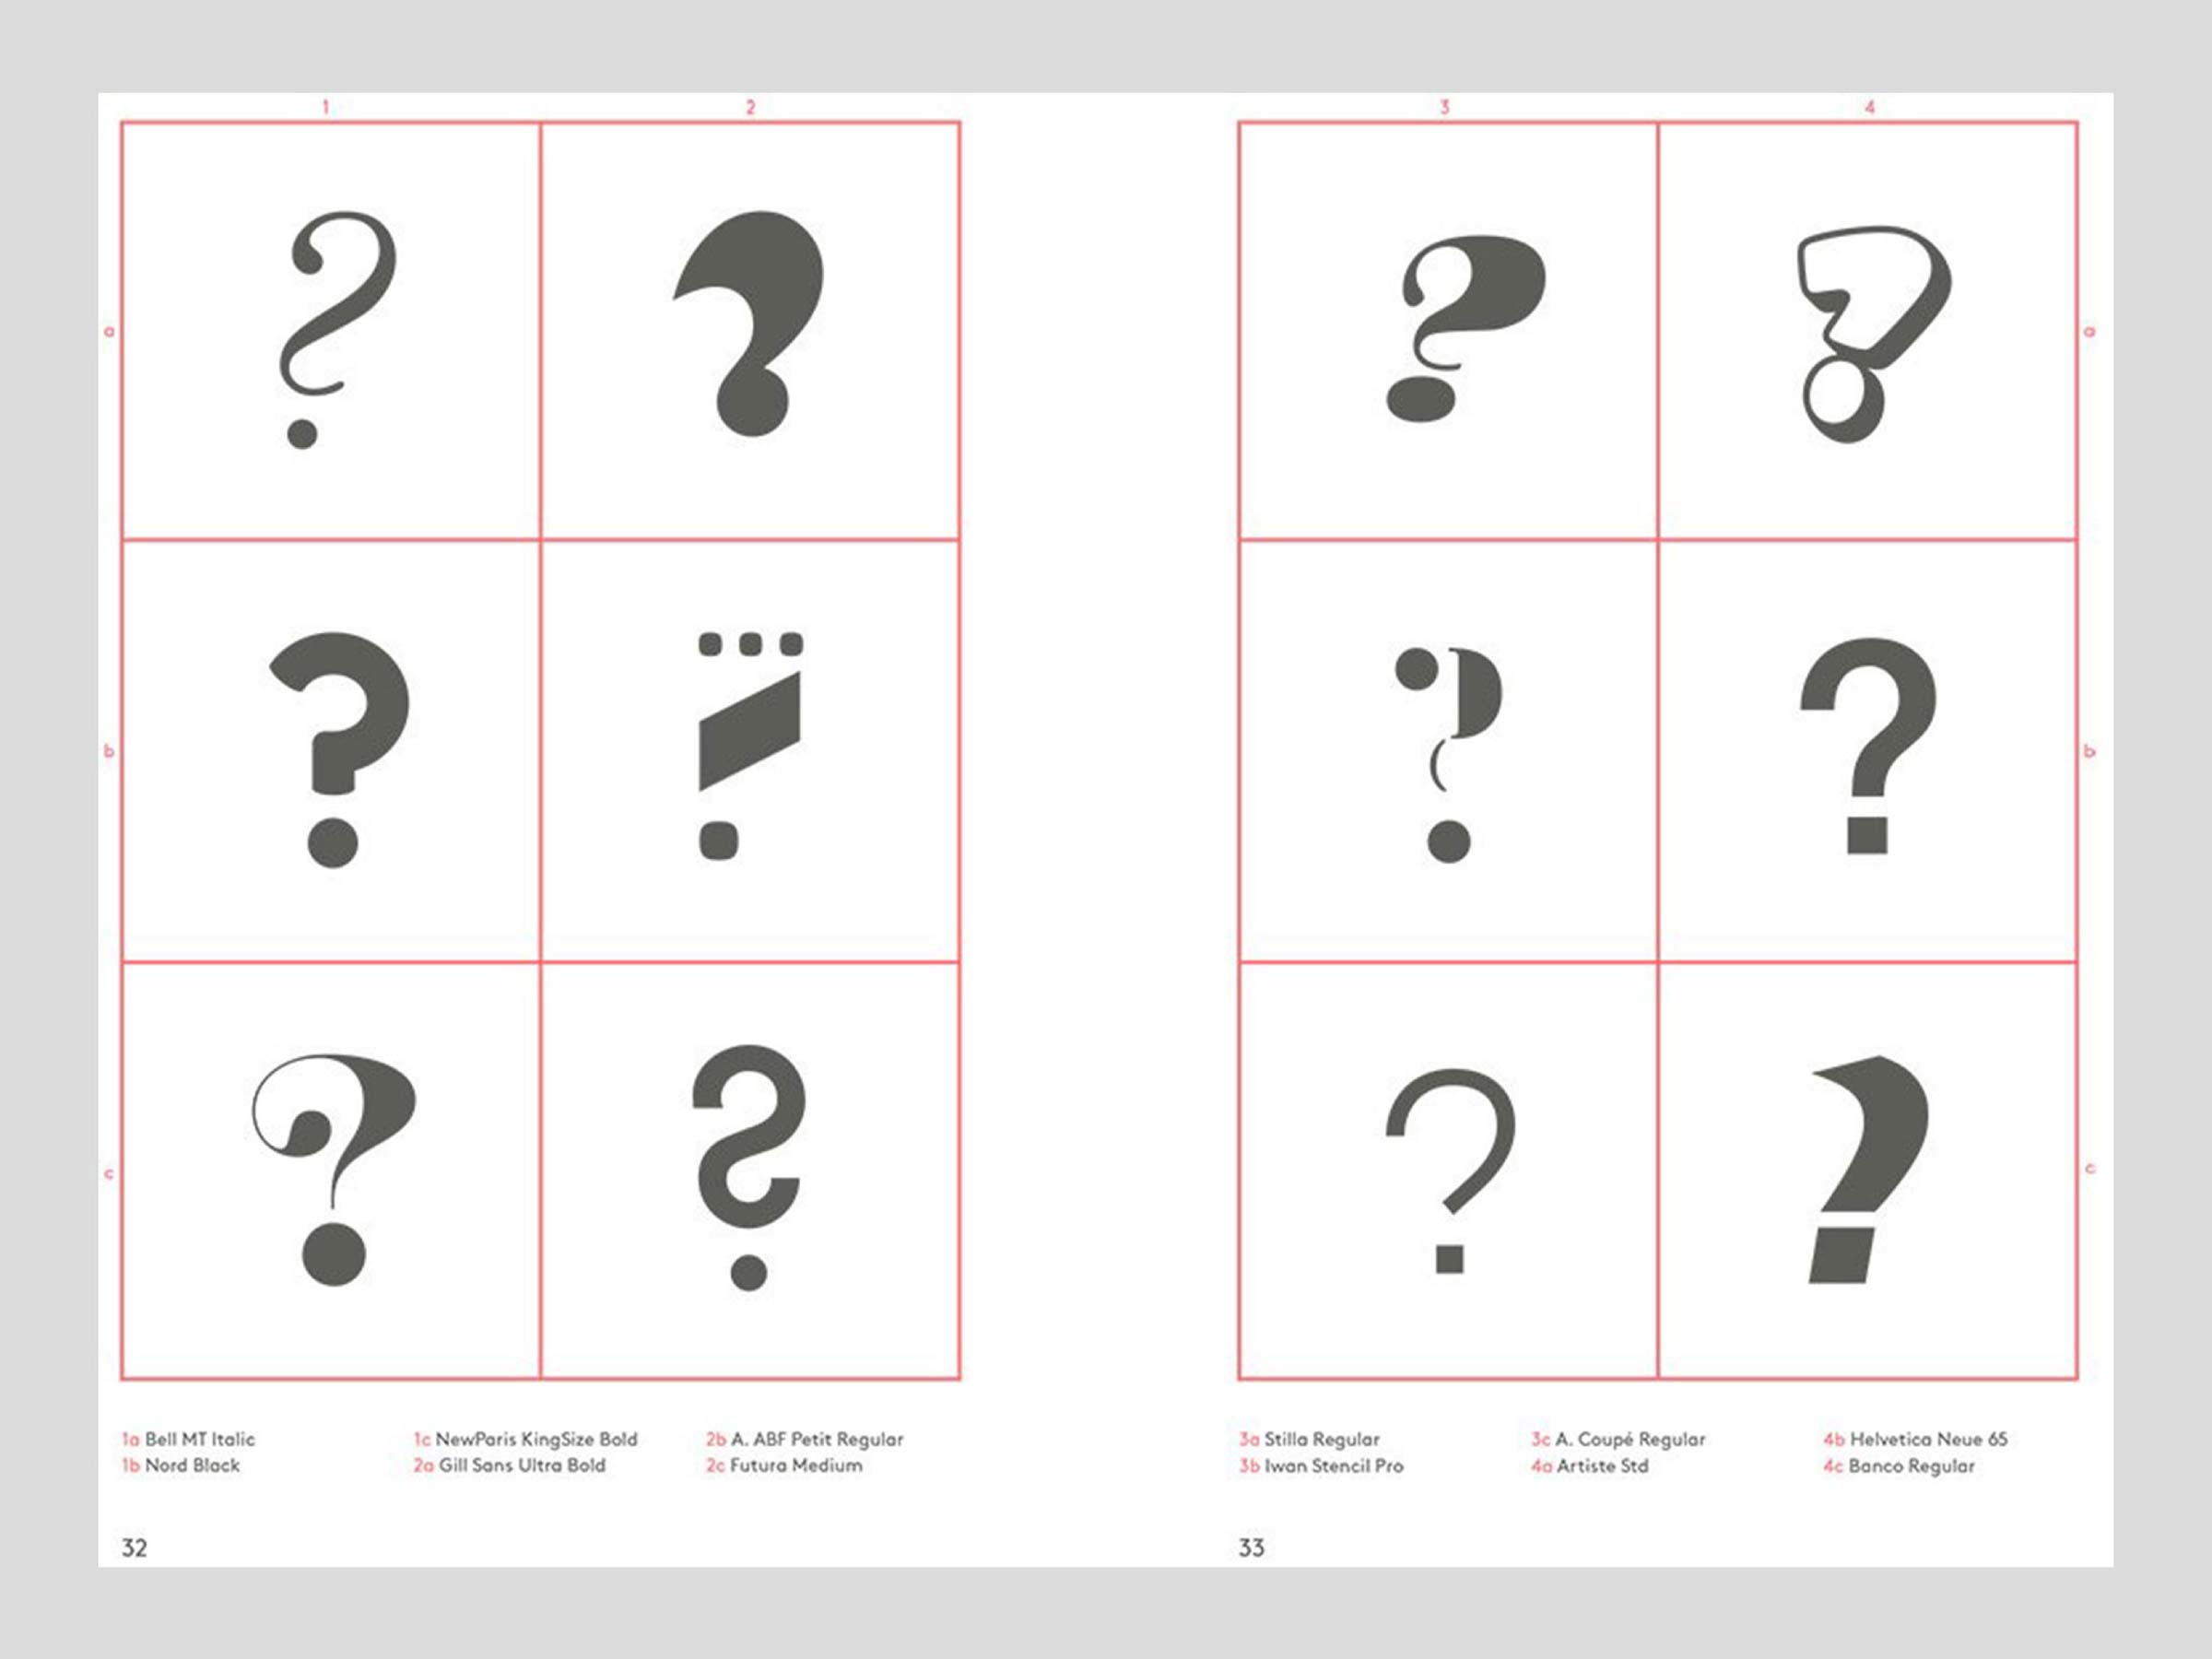 Made-Somewhere-Blog-Post-Our Favourite Design Publication – Glyph*: A Visual Exploration of Punctuation Marks and Other Typographic Symbols - inside pages exploring question marks